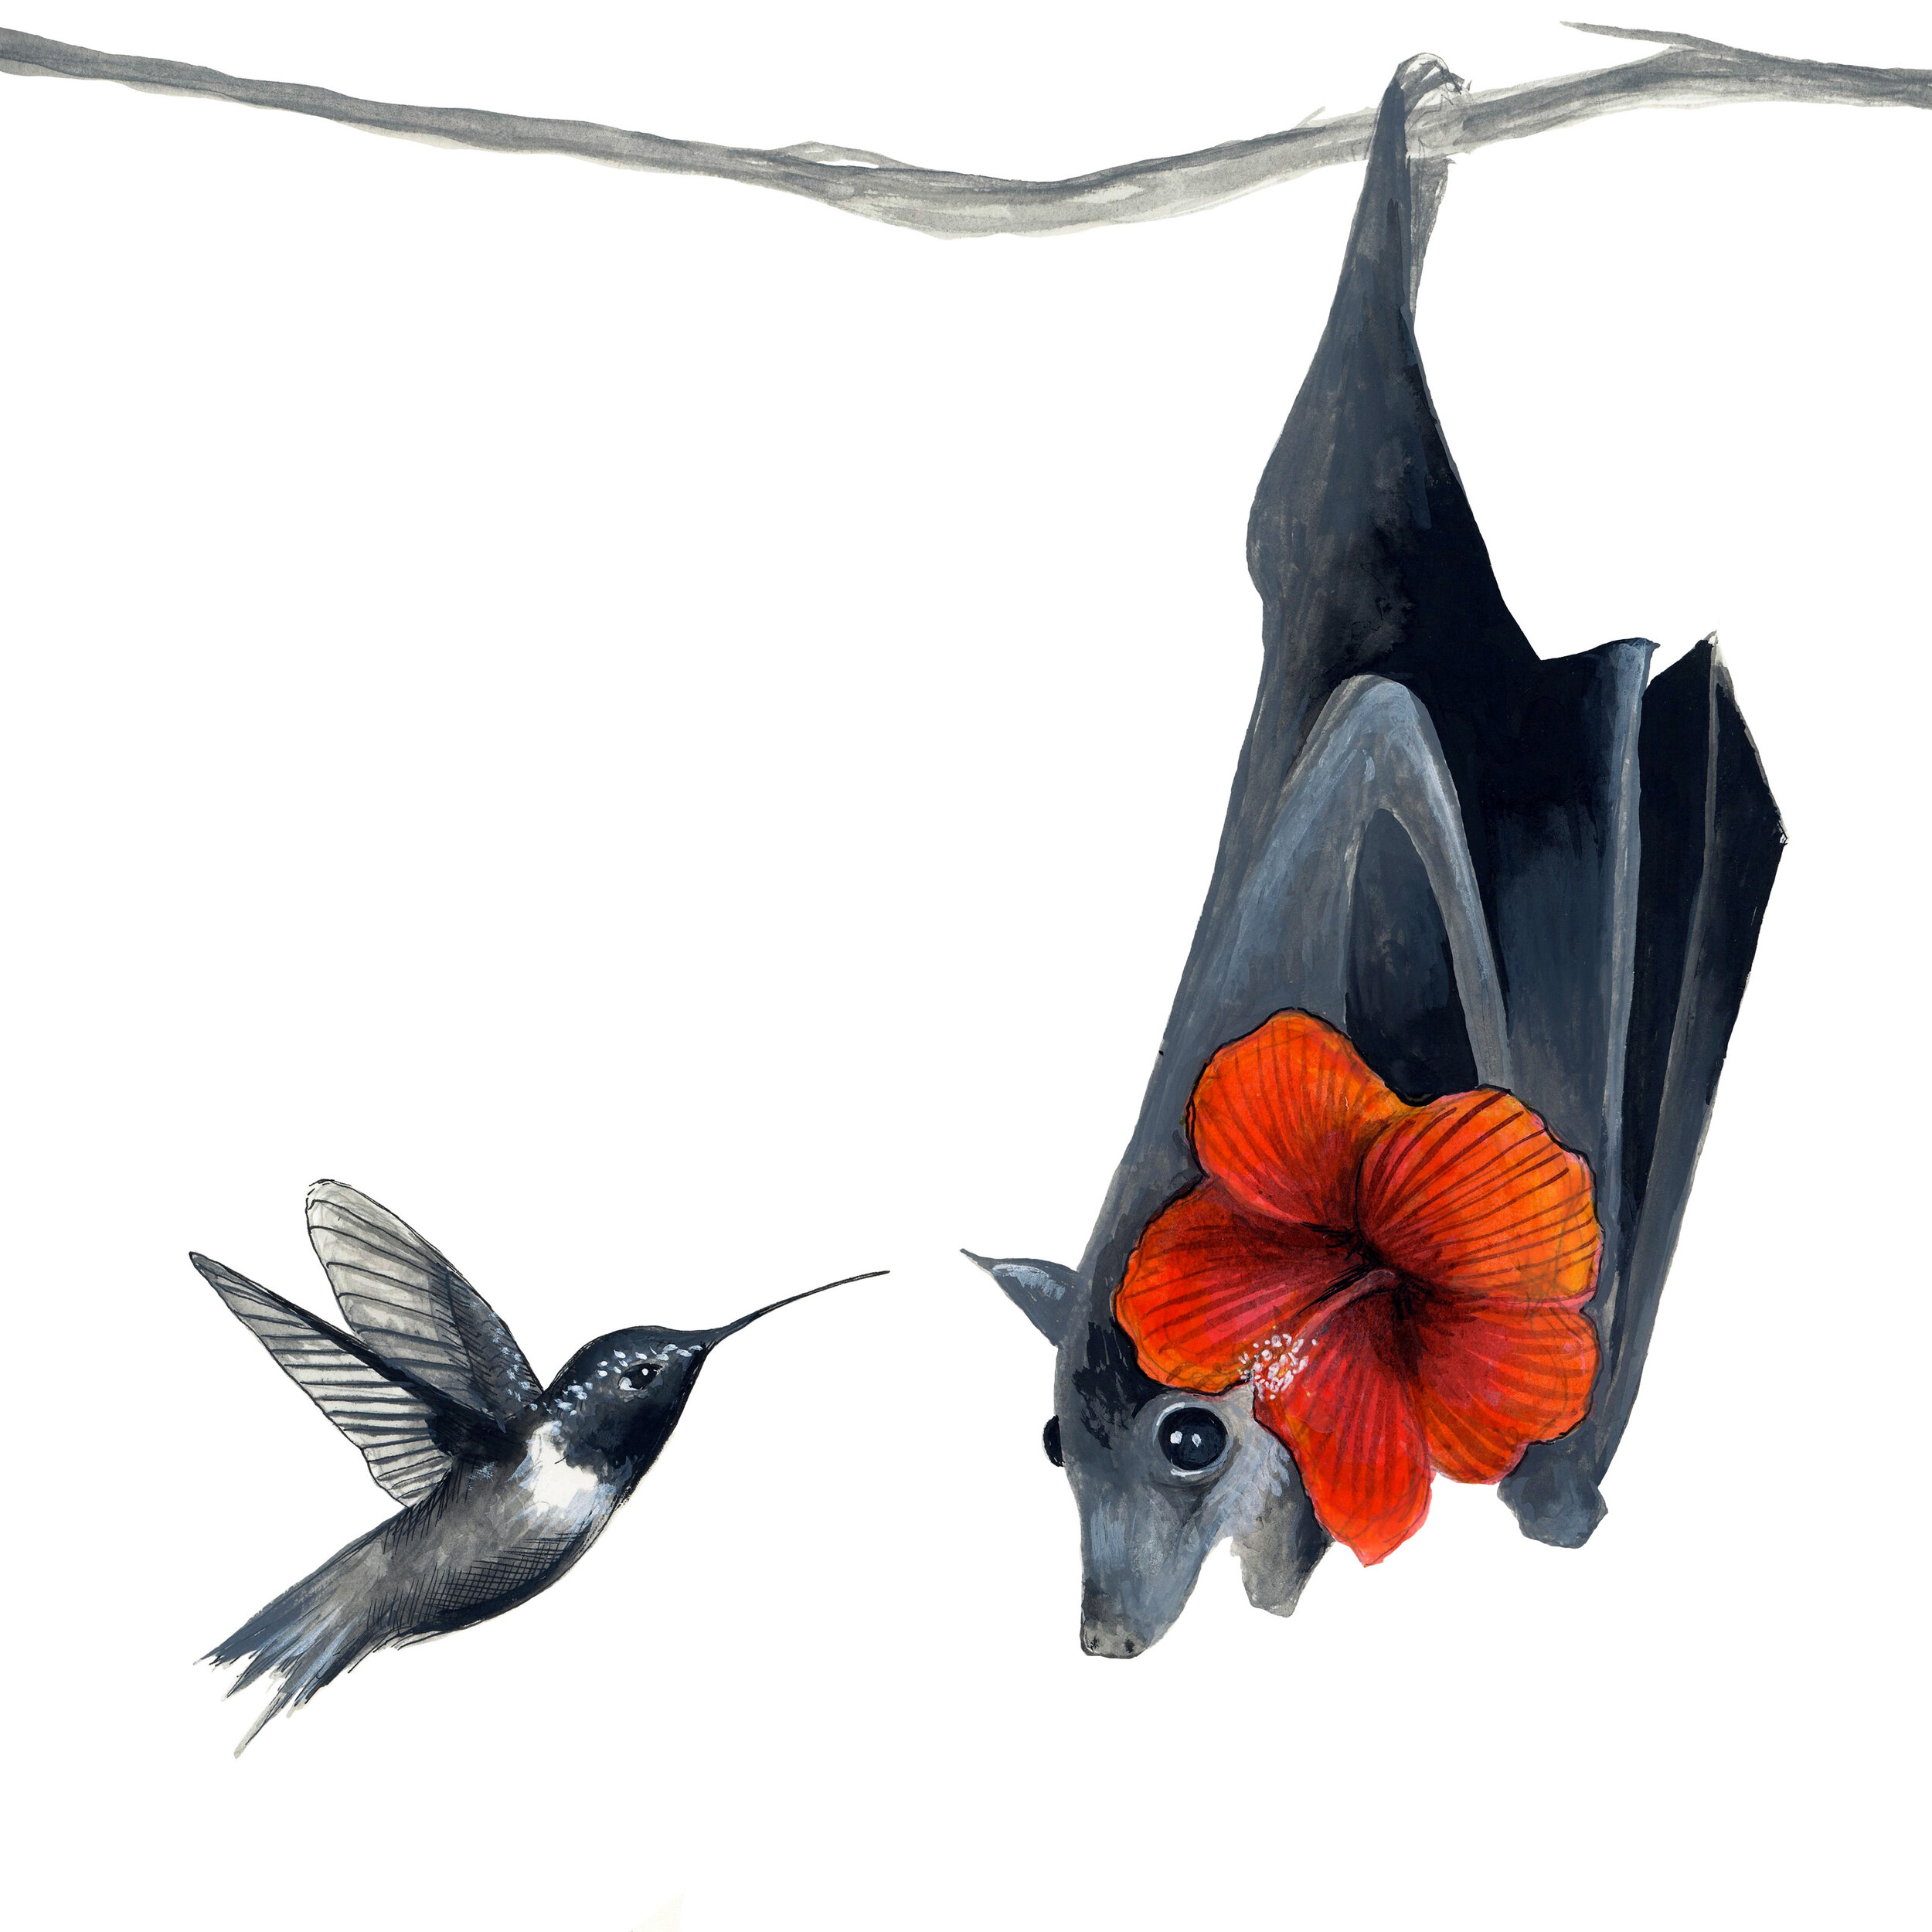 Deann Acton, Bat and Bird, watercolor or ink on paper, 2019.jpg